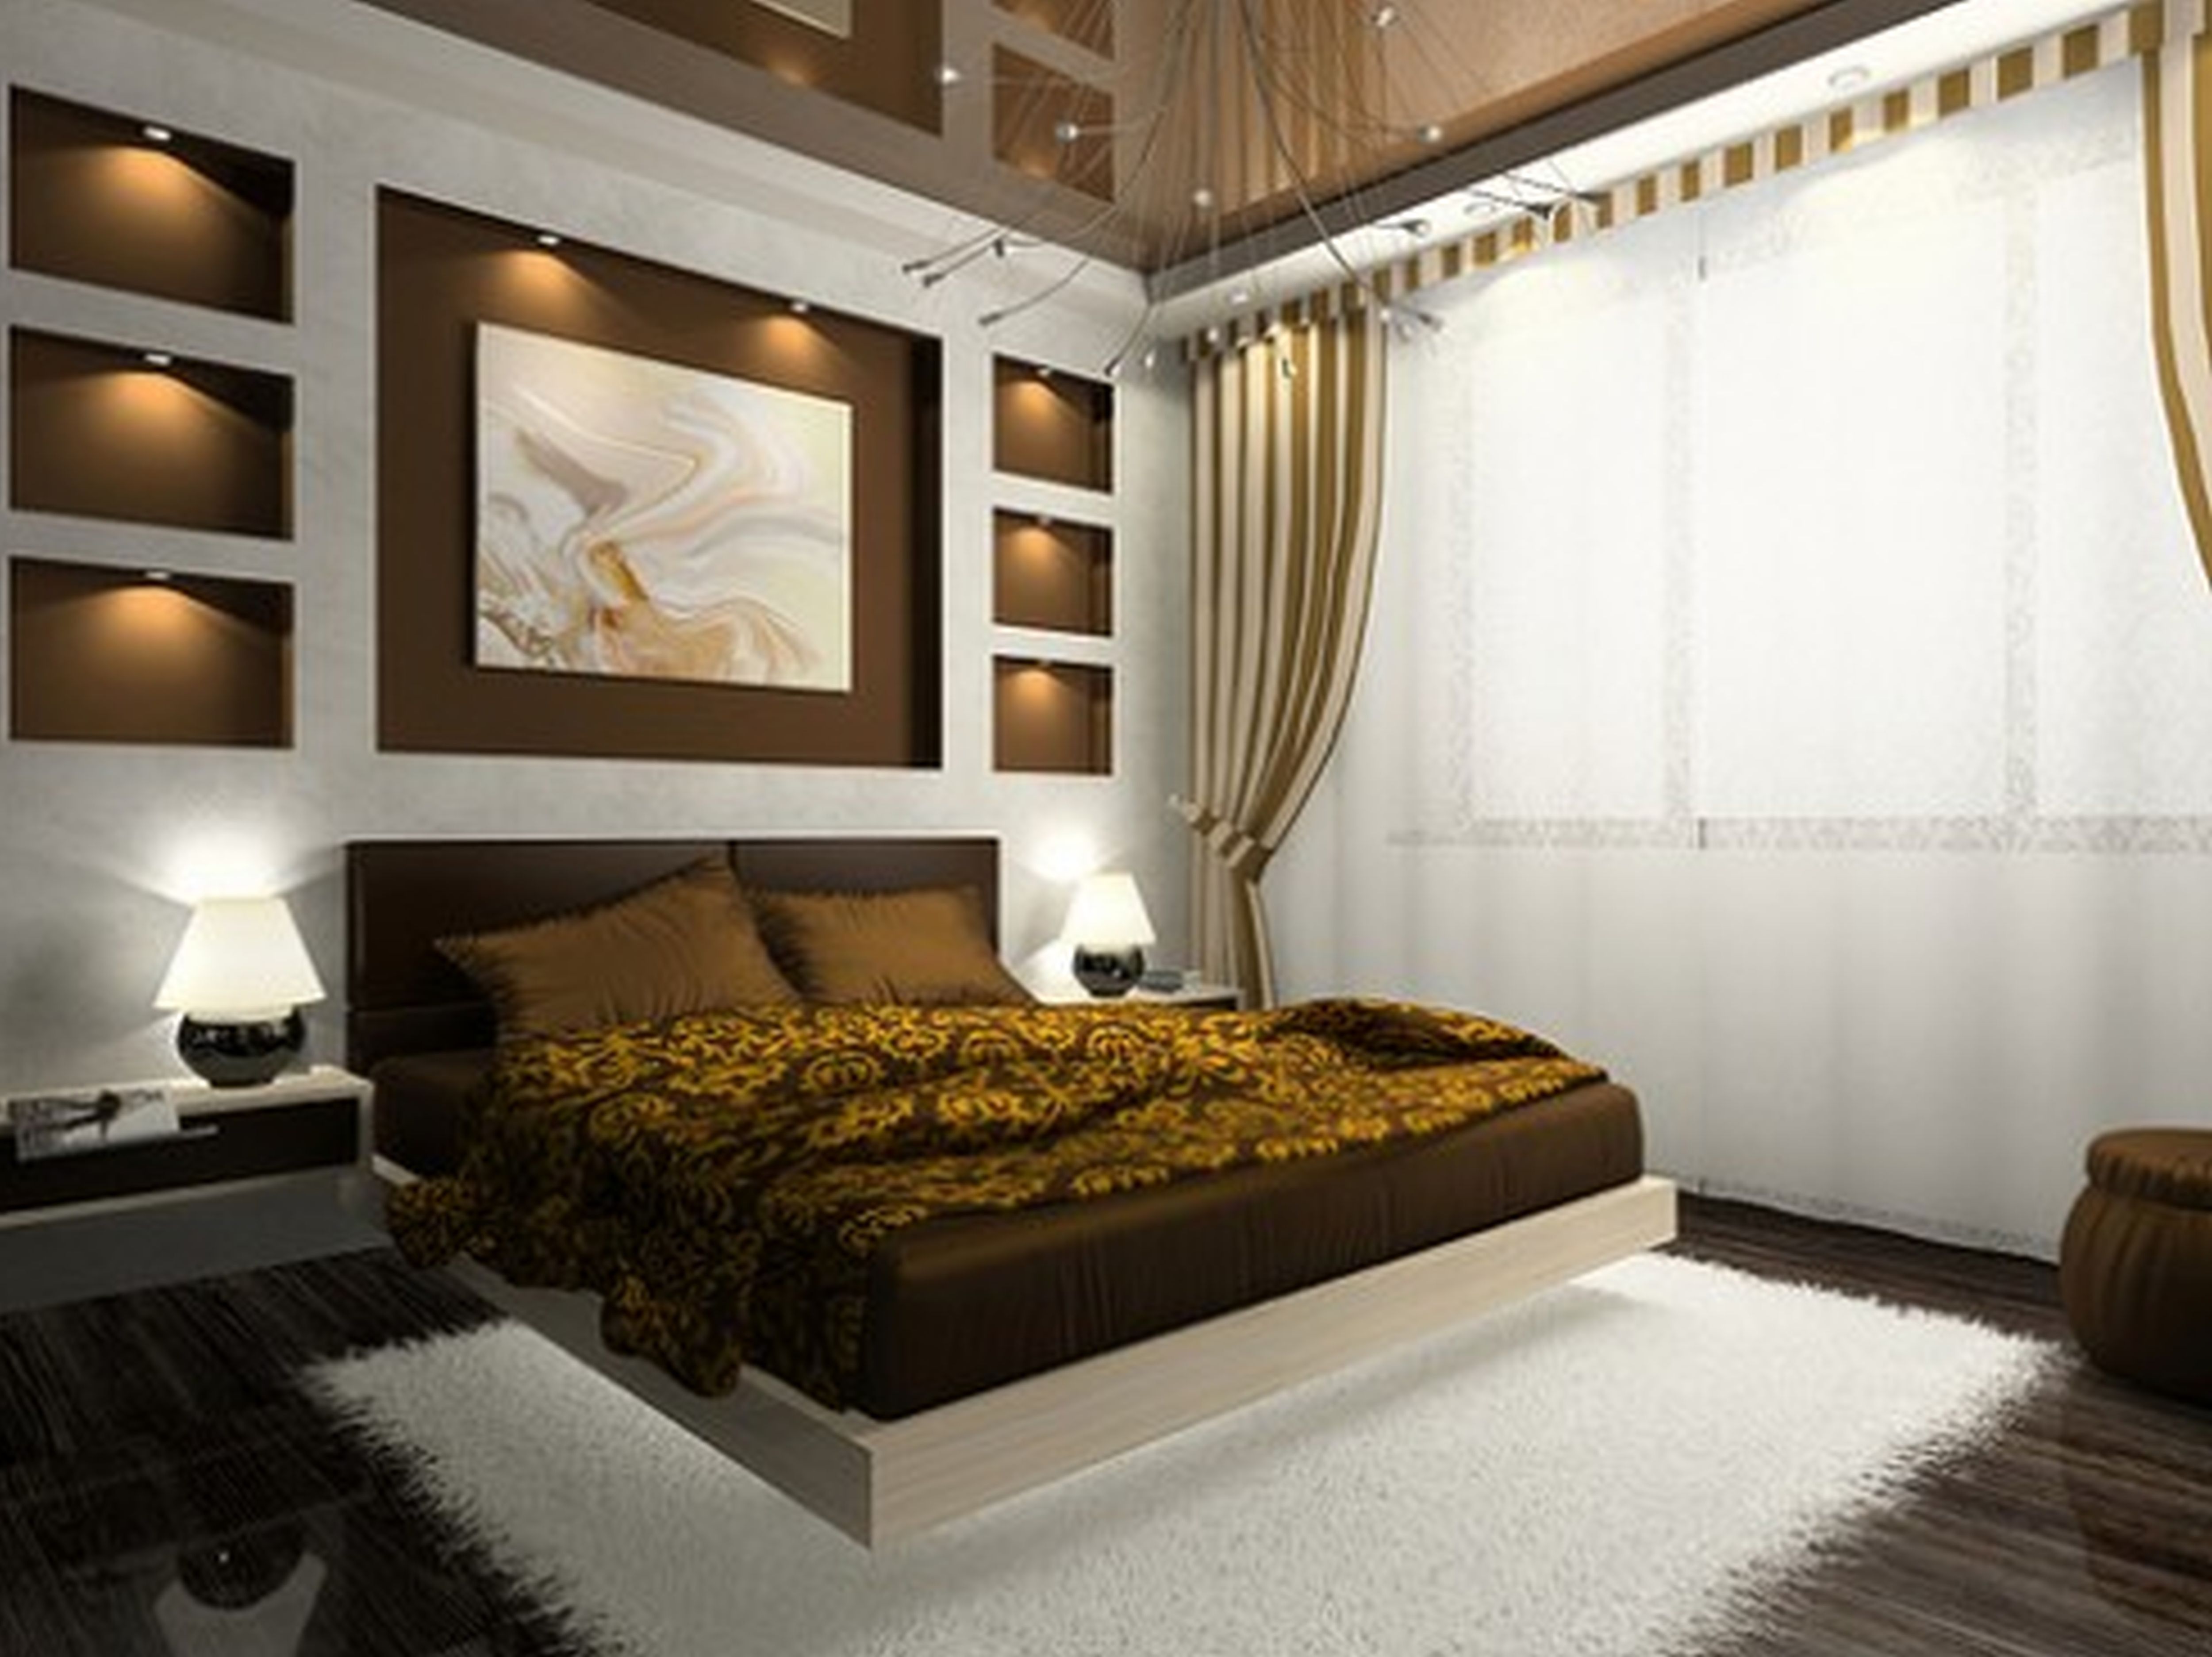 bedroom master luxury bedrooms luxurious designs decorating redecorate bed budget comfortable contemporary tips peek fascinating designer